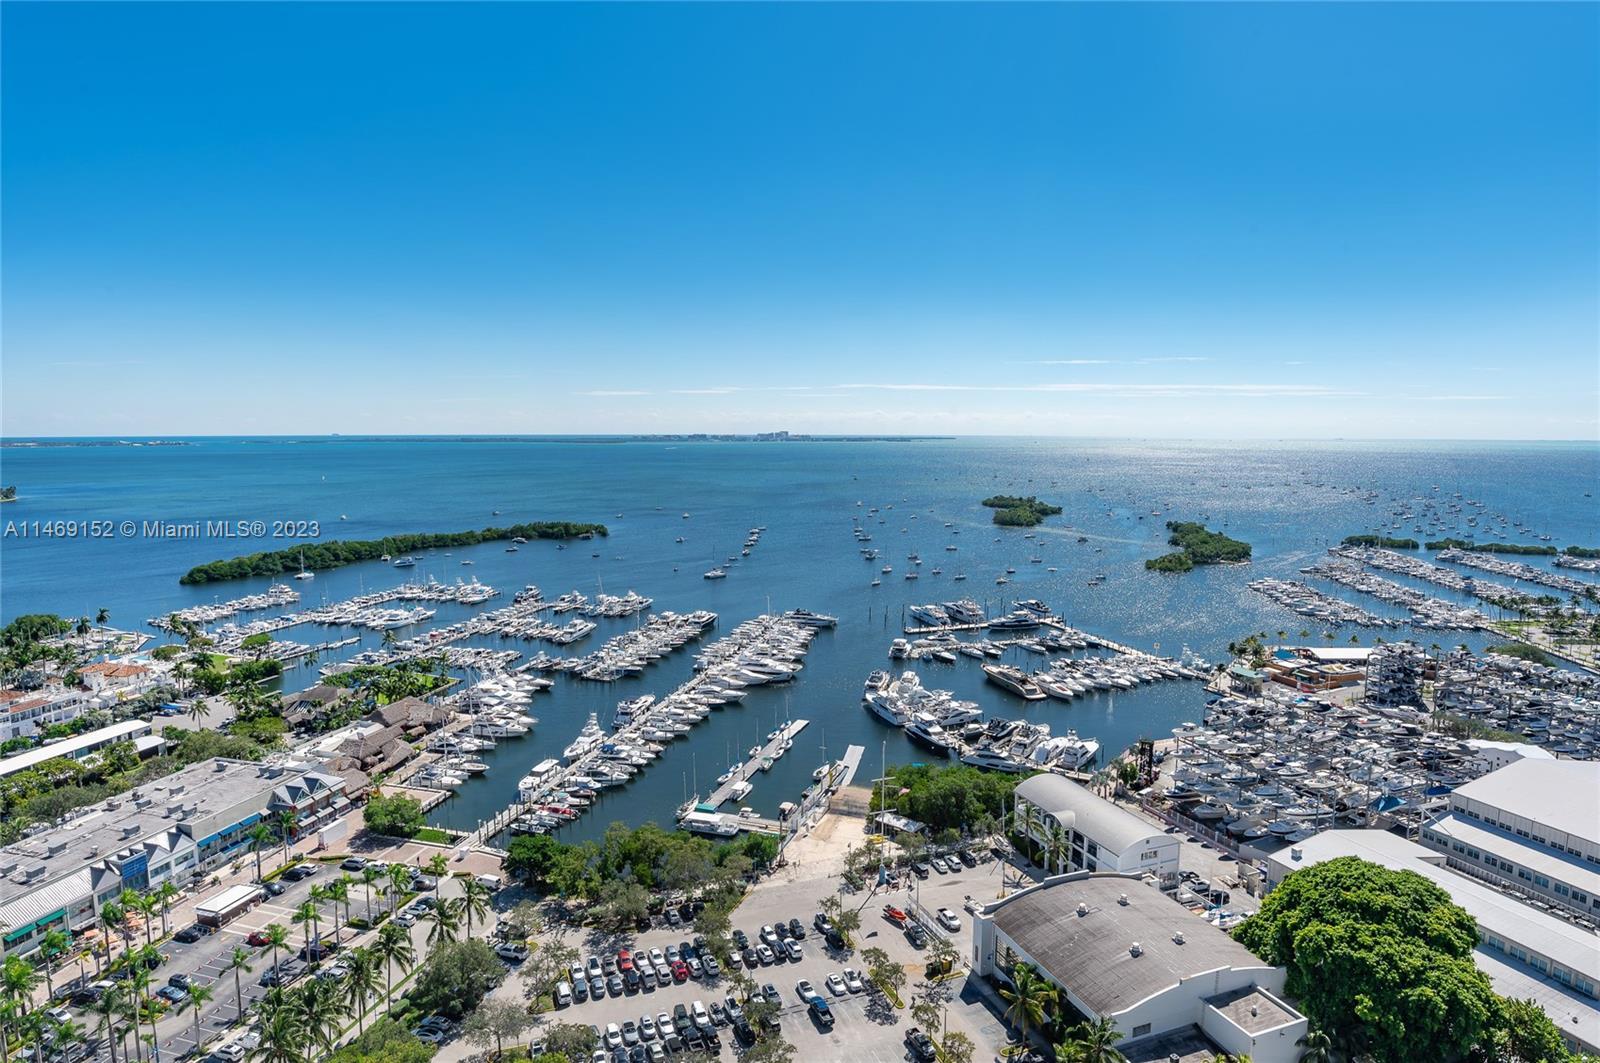 Coconut Grove LOWER PENTHOUSE. This opulent 6,920 SF PH unit located in the iconic Grovenor house fe